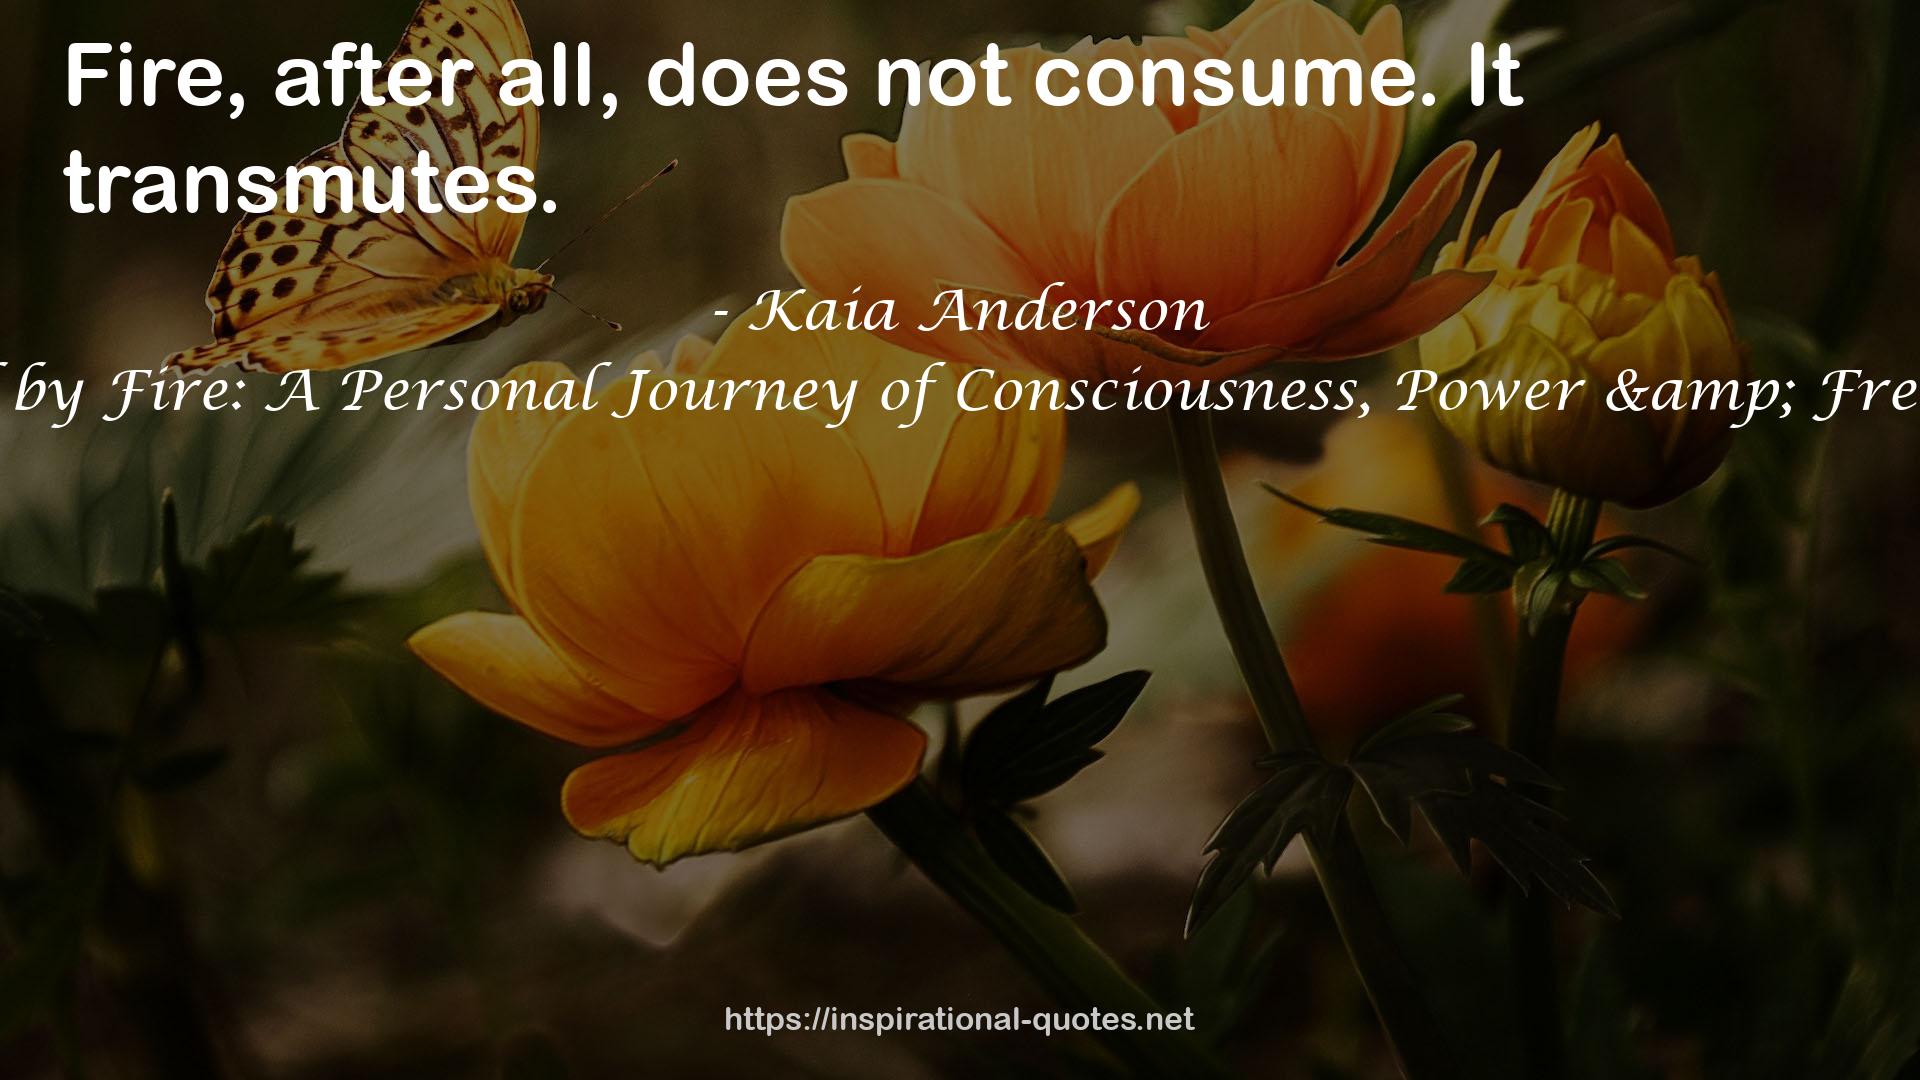 Kaia Anderson QUOTES